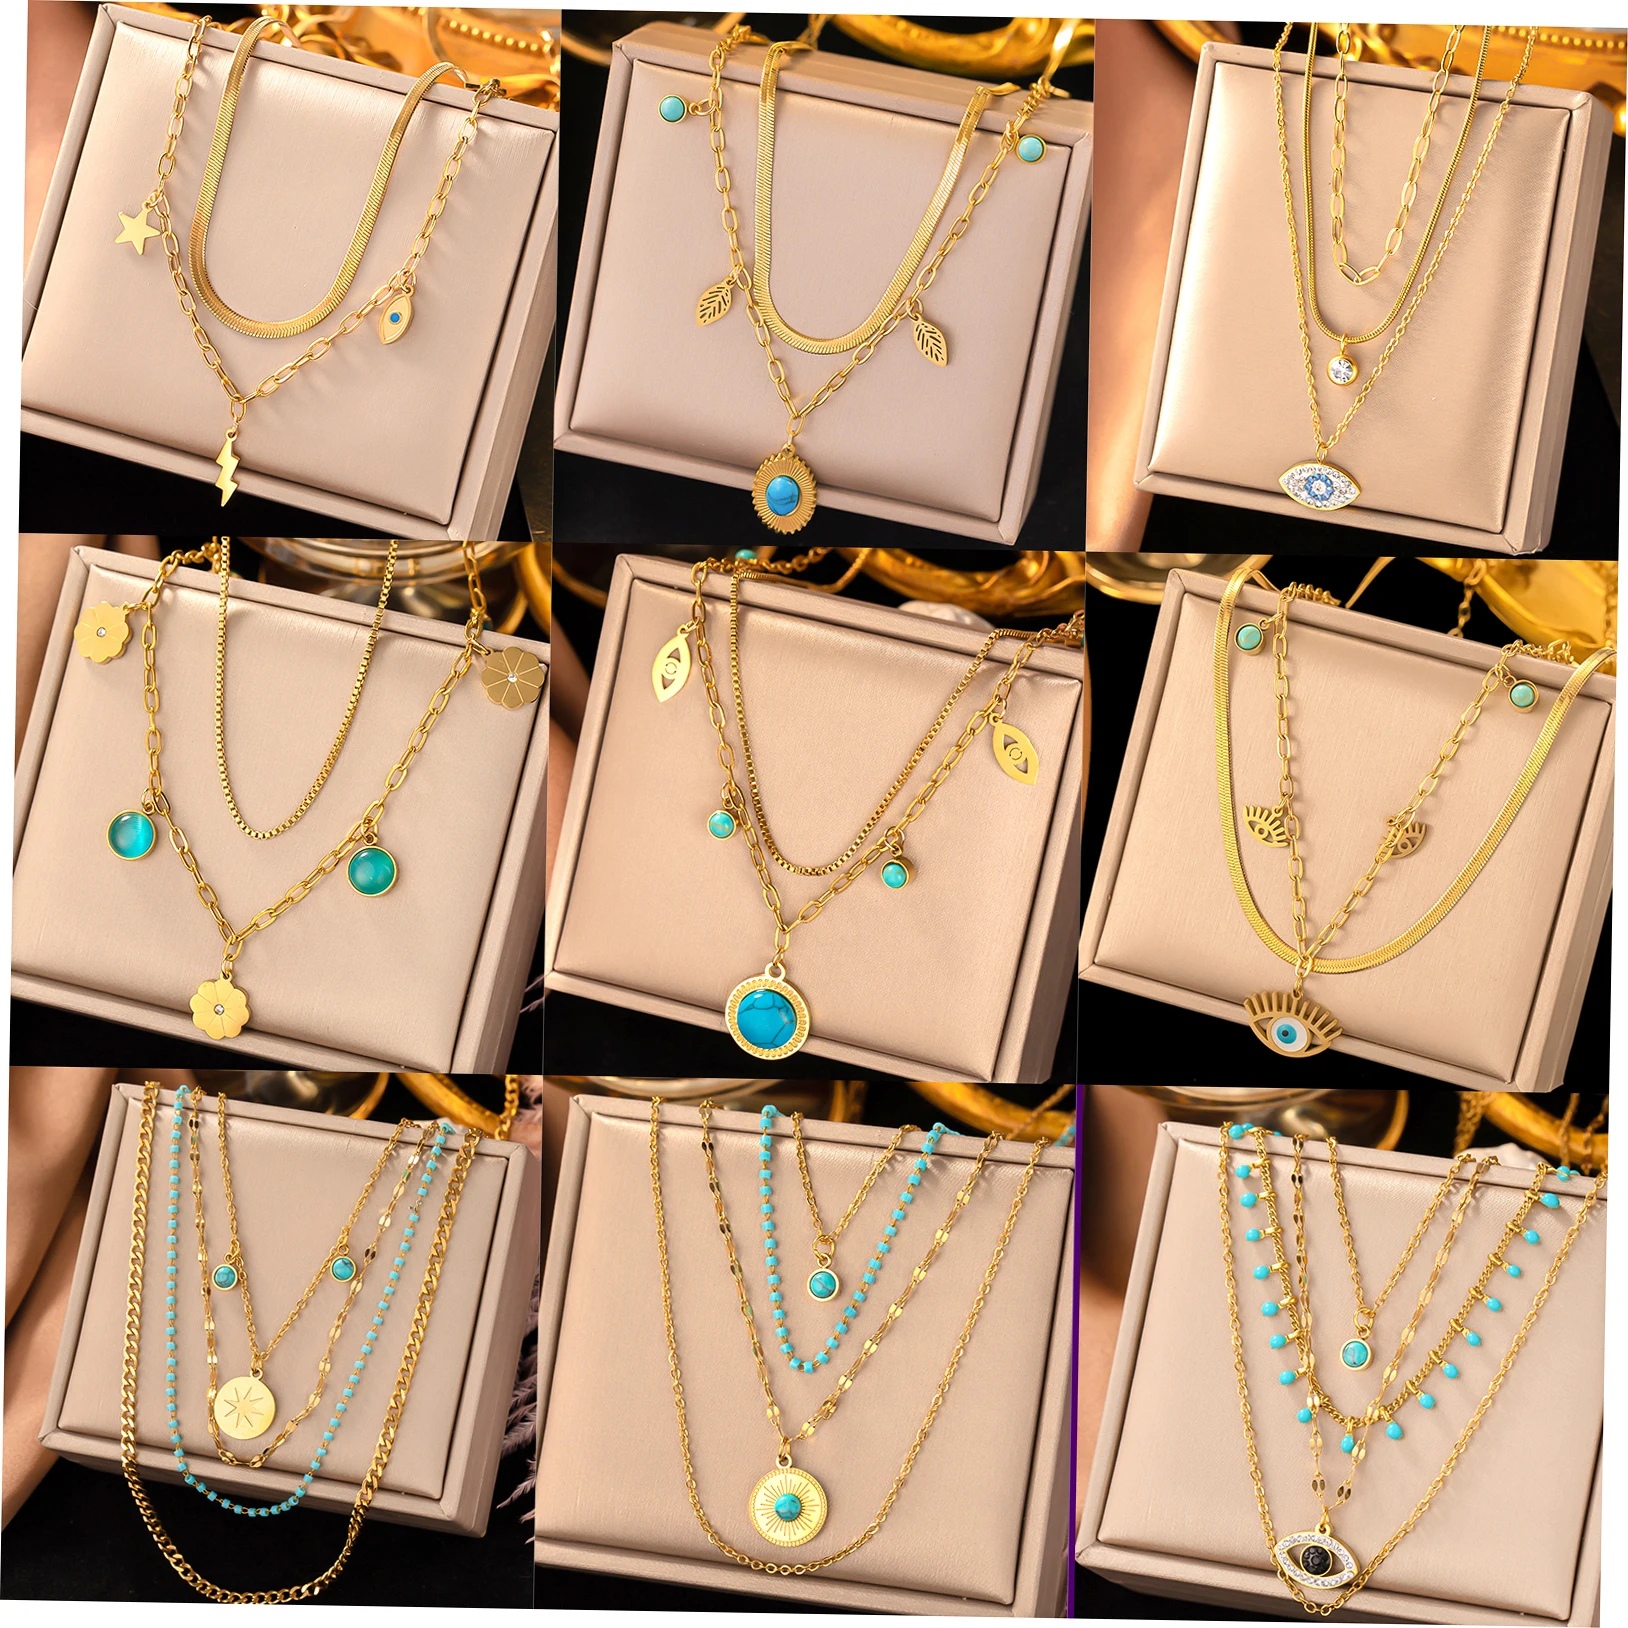 

Boho Stainless Steel 18k Gold Layered Sanke Chain Turquoise Beads Pendant Necklace Women Zircon Eyes Choker Necklace For Gift